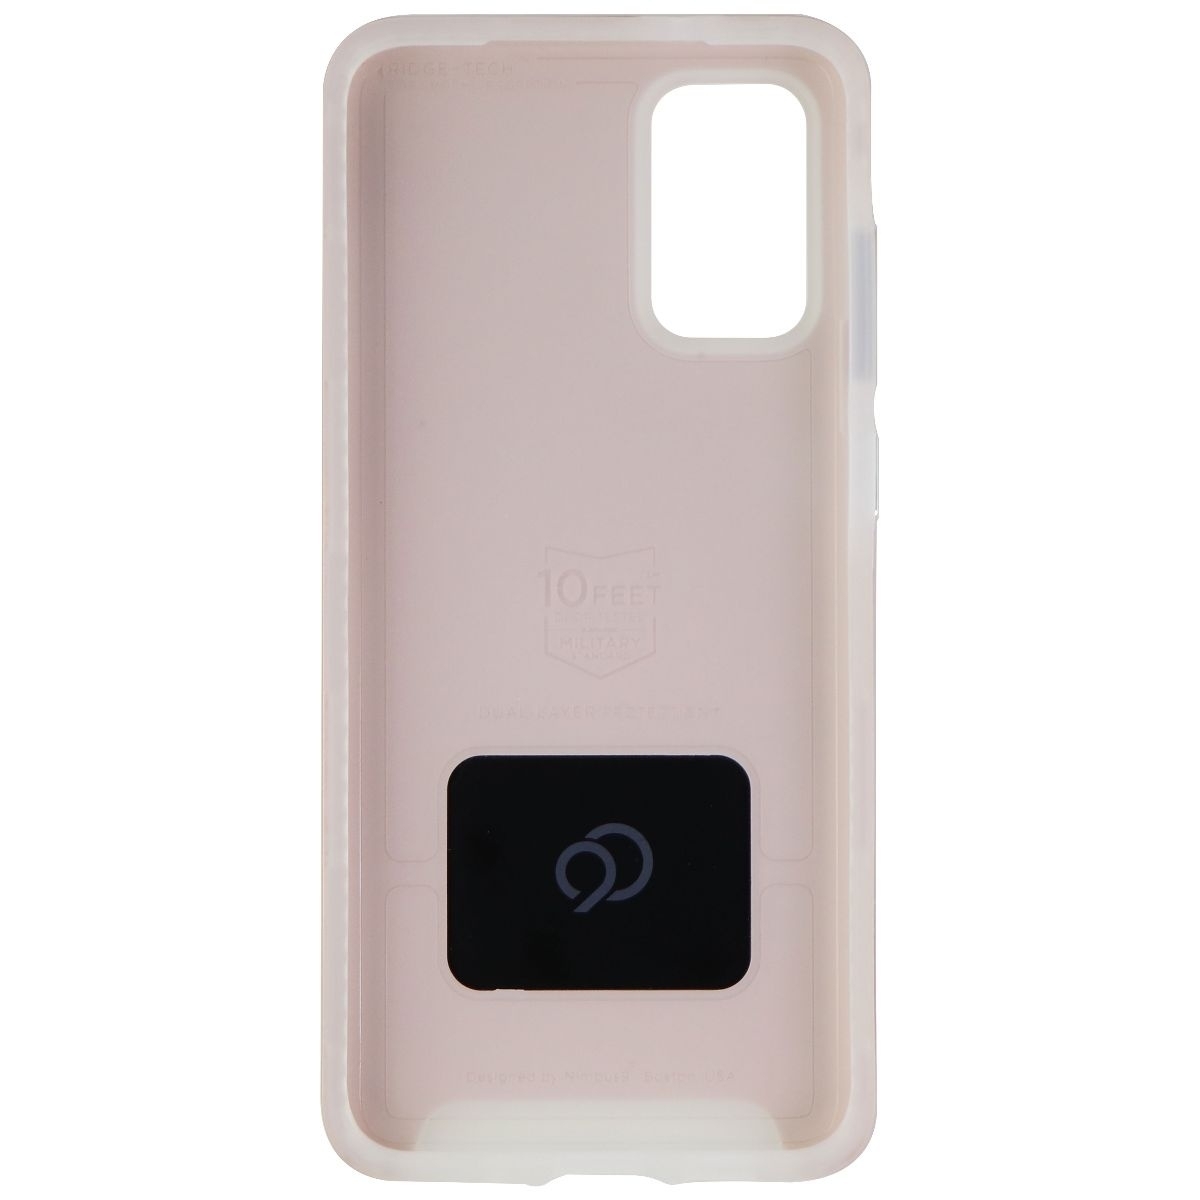 Nimbus9 Cirrus 2 Series Case For Samsung Galaxy (S20+) - Rose Pink / Frost